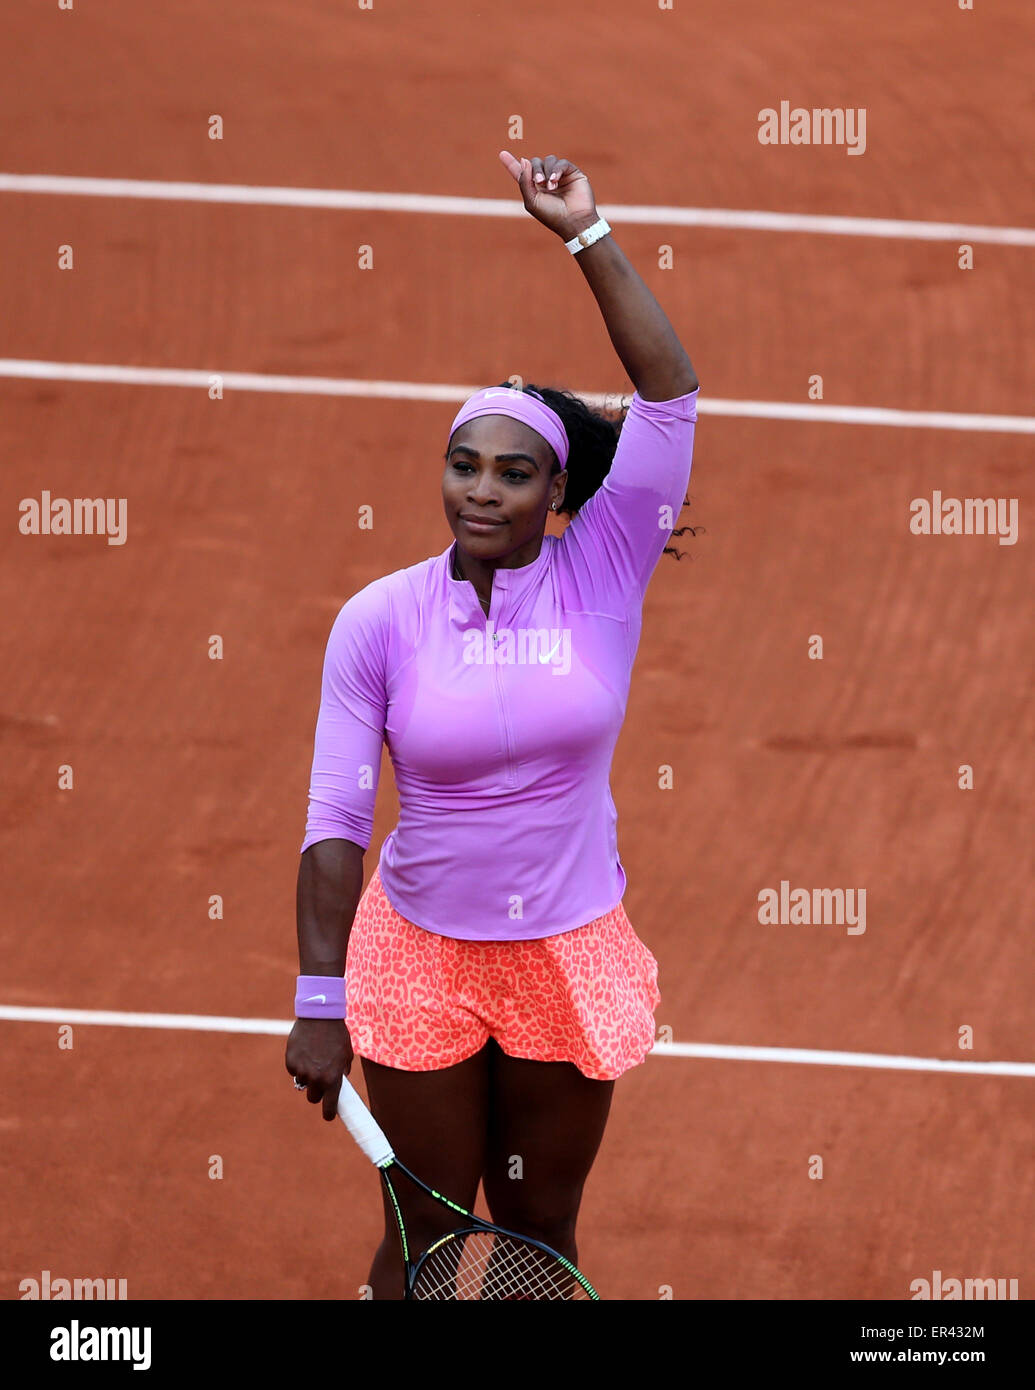 Paris, France. 26th May, 2015. Serena Williams of the United States reacts after the women's singles first round match against Andrea Hlavackova of the Czech Republic at 2015 French Open tennis tournament at Roland Garros, in Paris, France on May 26, 2015. Serena Williams won 2-0. Credit:  Han Yan/Xinhua/Alamy Live News Stock Photo